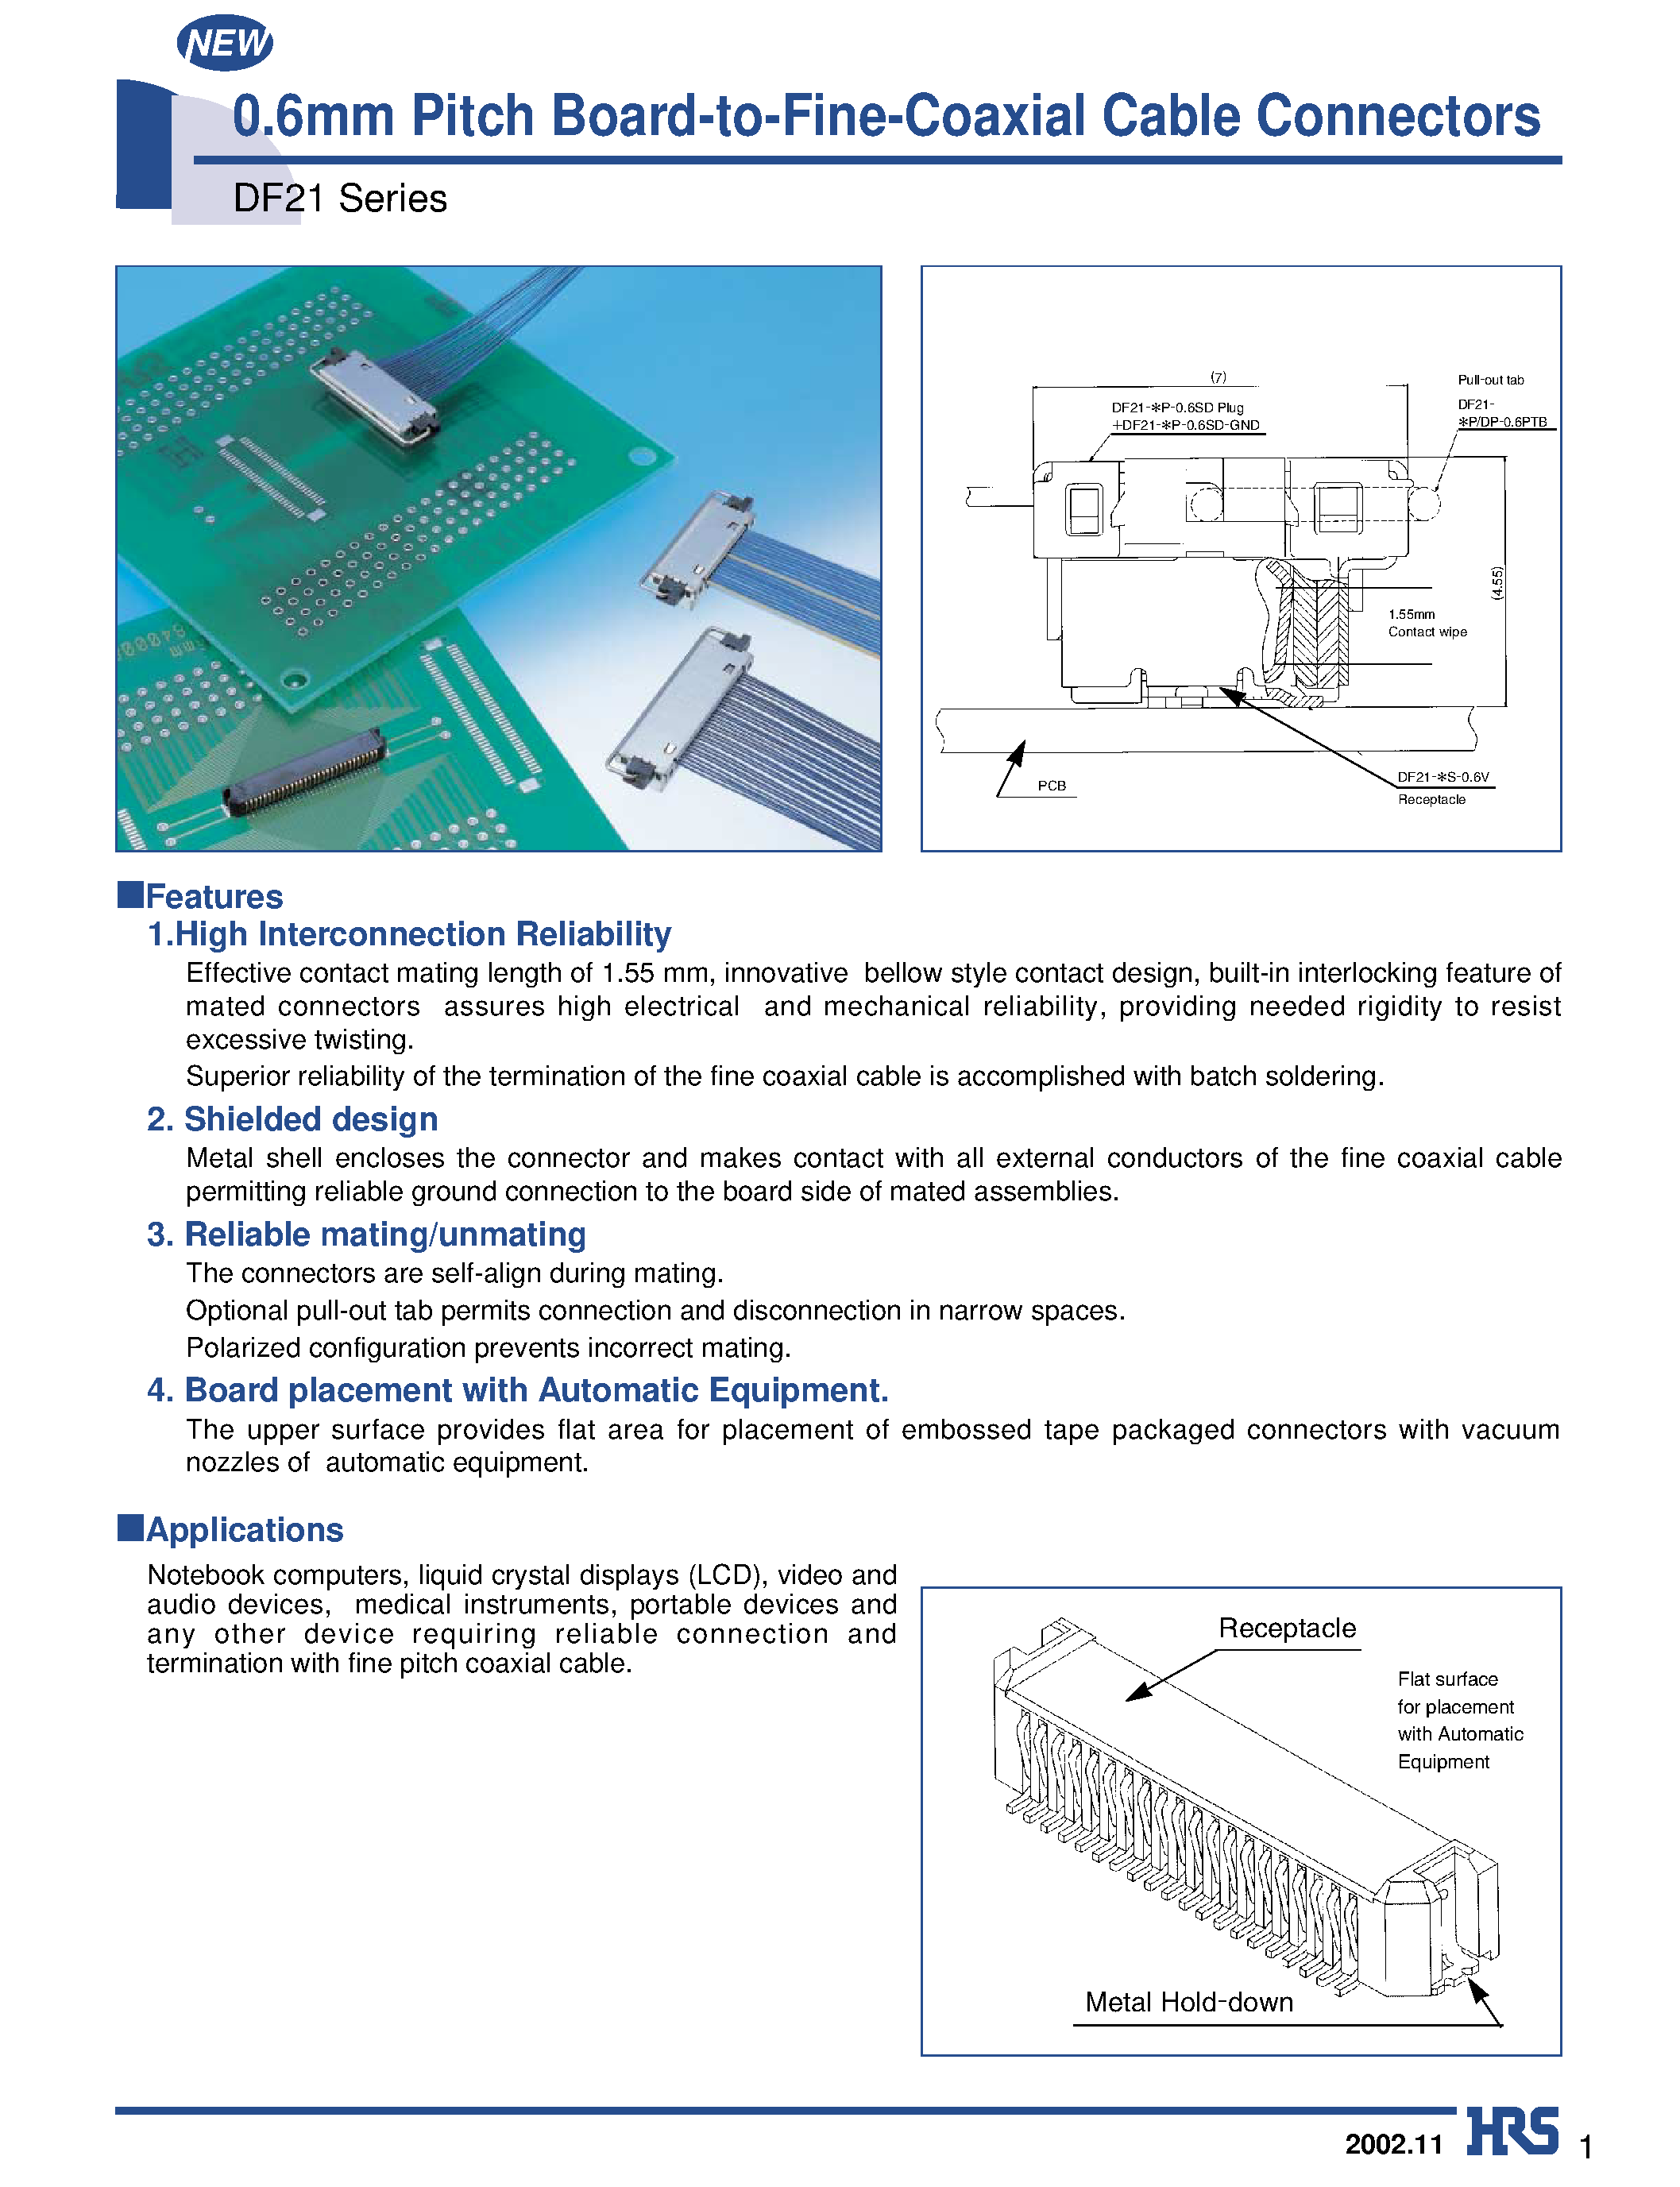 Datasheet DF21-40P-0.6SD-GND - 0.6mm Pitch Board-to-Fine-Coaxial Cable Connectors page 1